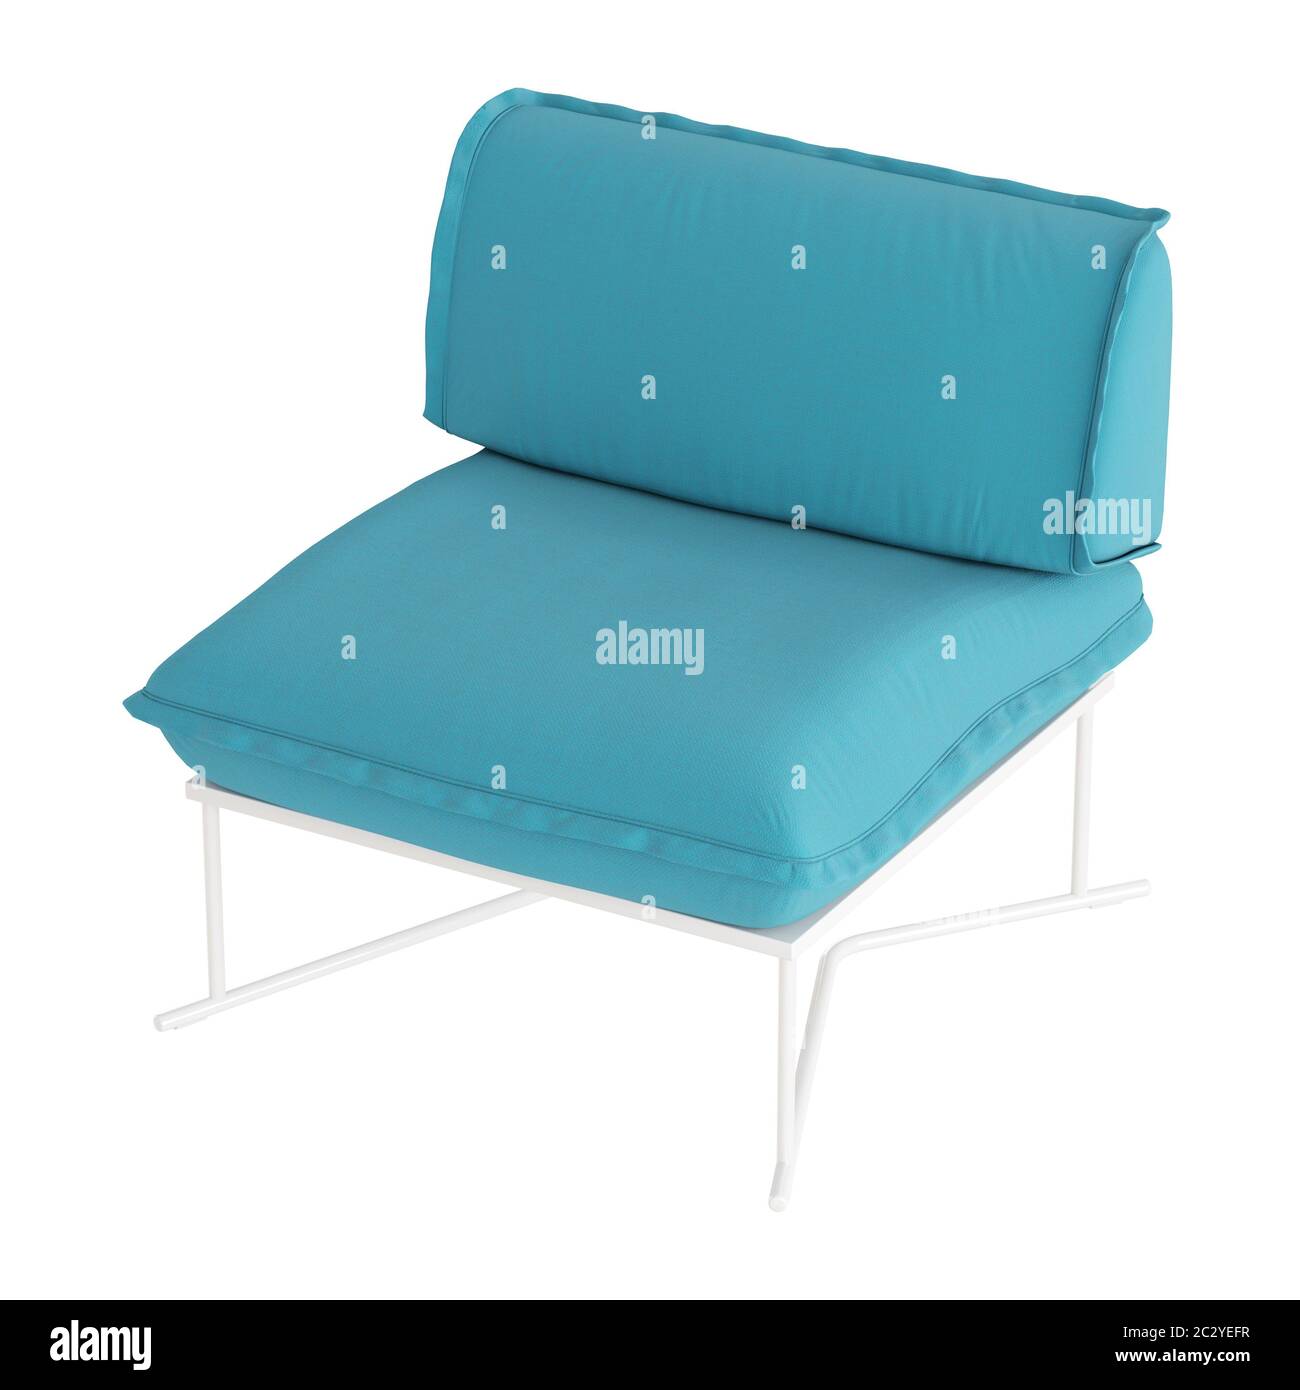 Soft blue armchair on an isolated background with a white metal leg. 3d render Stock Photo